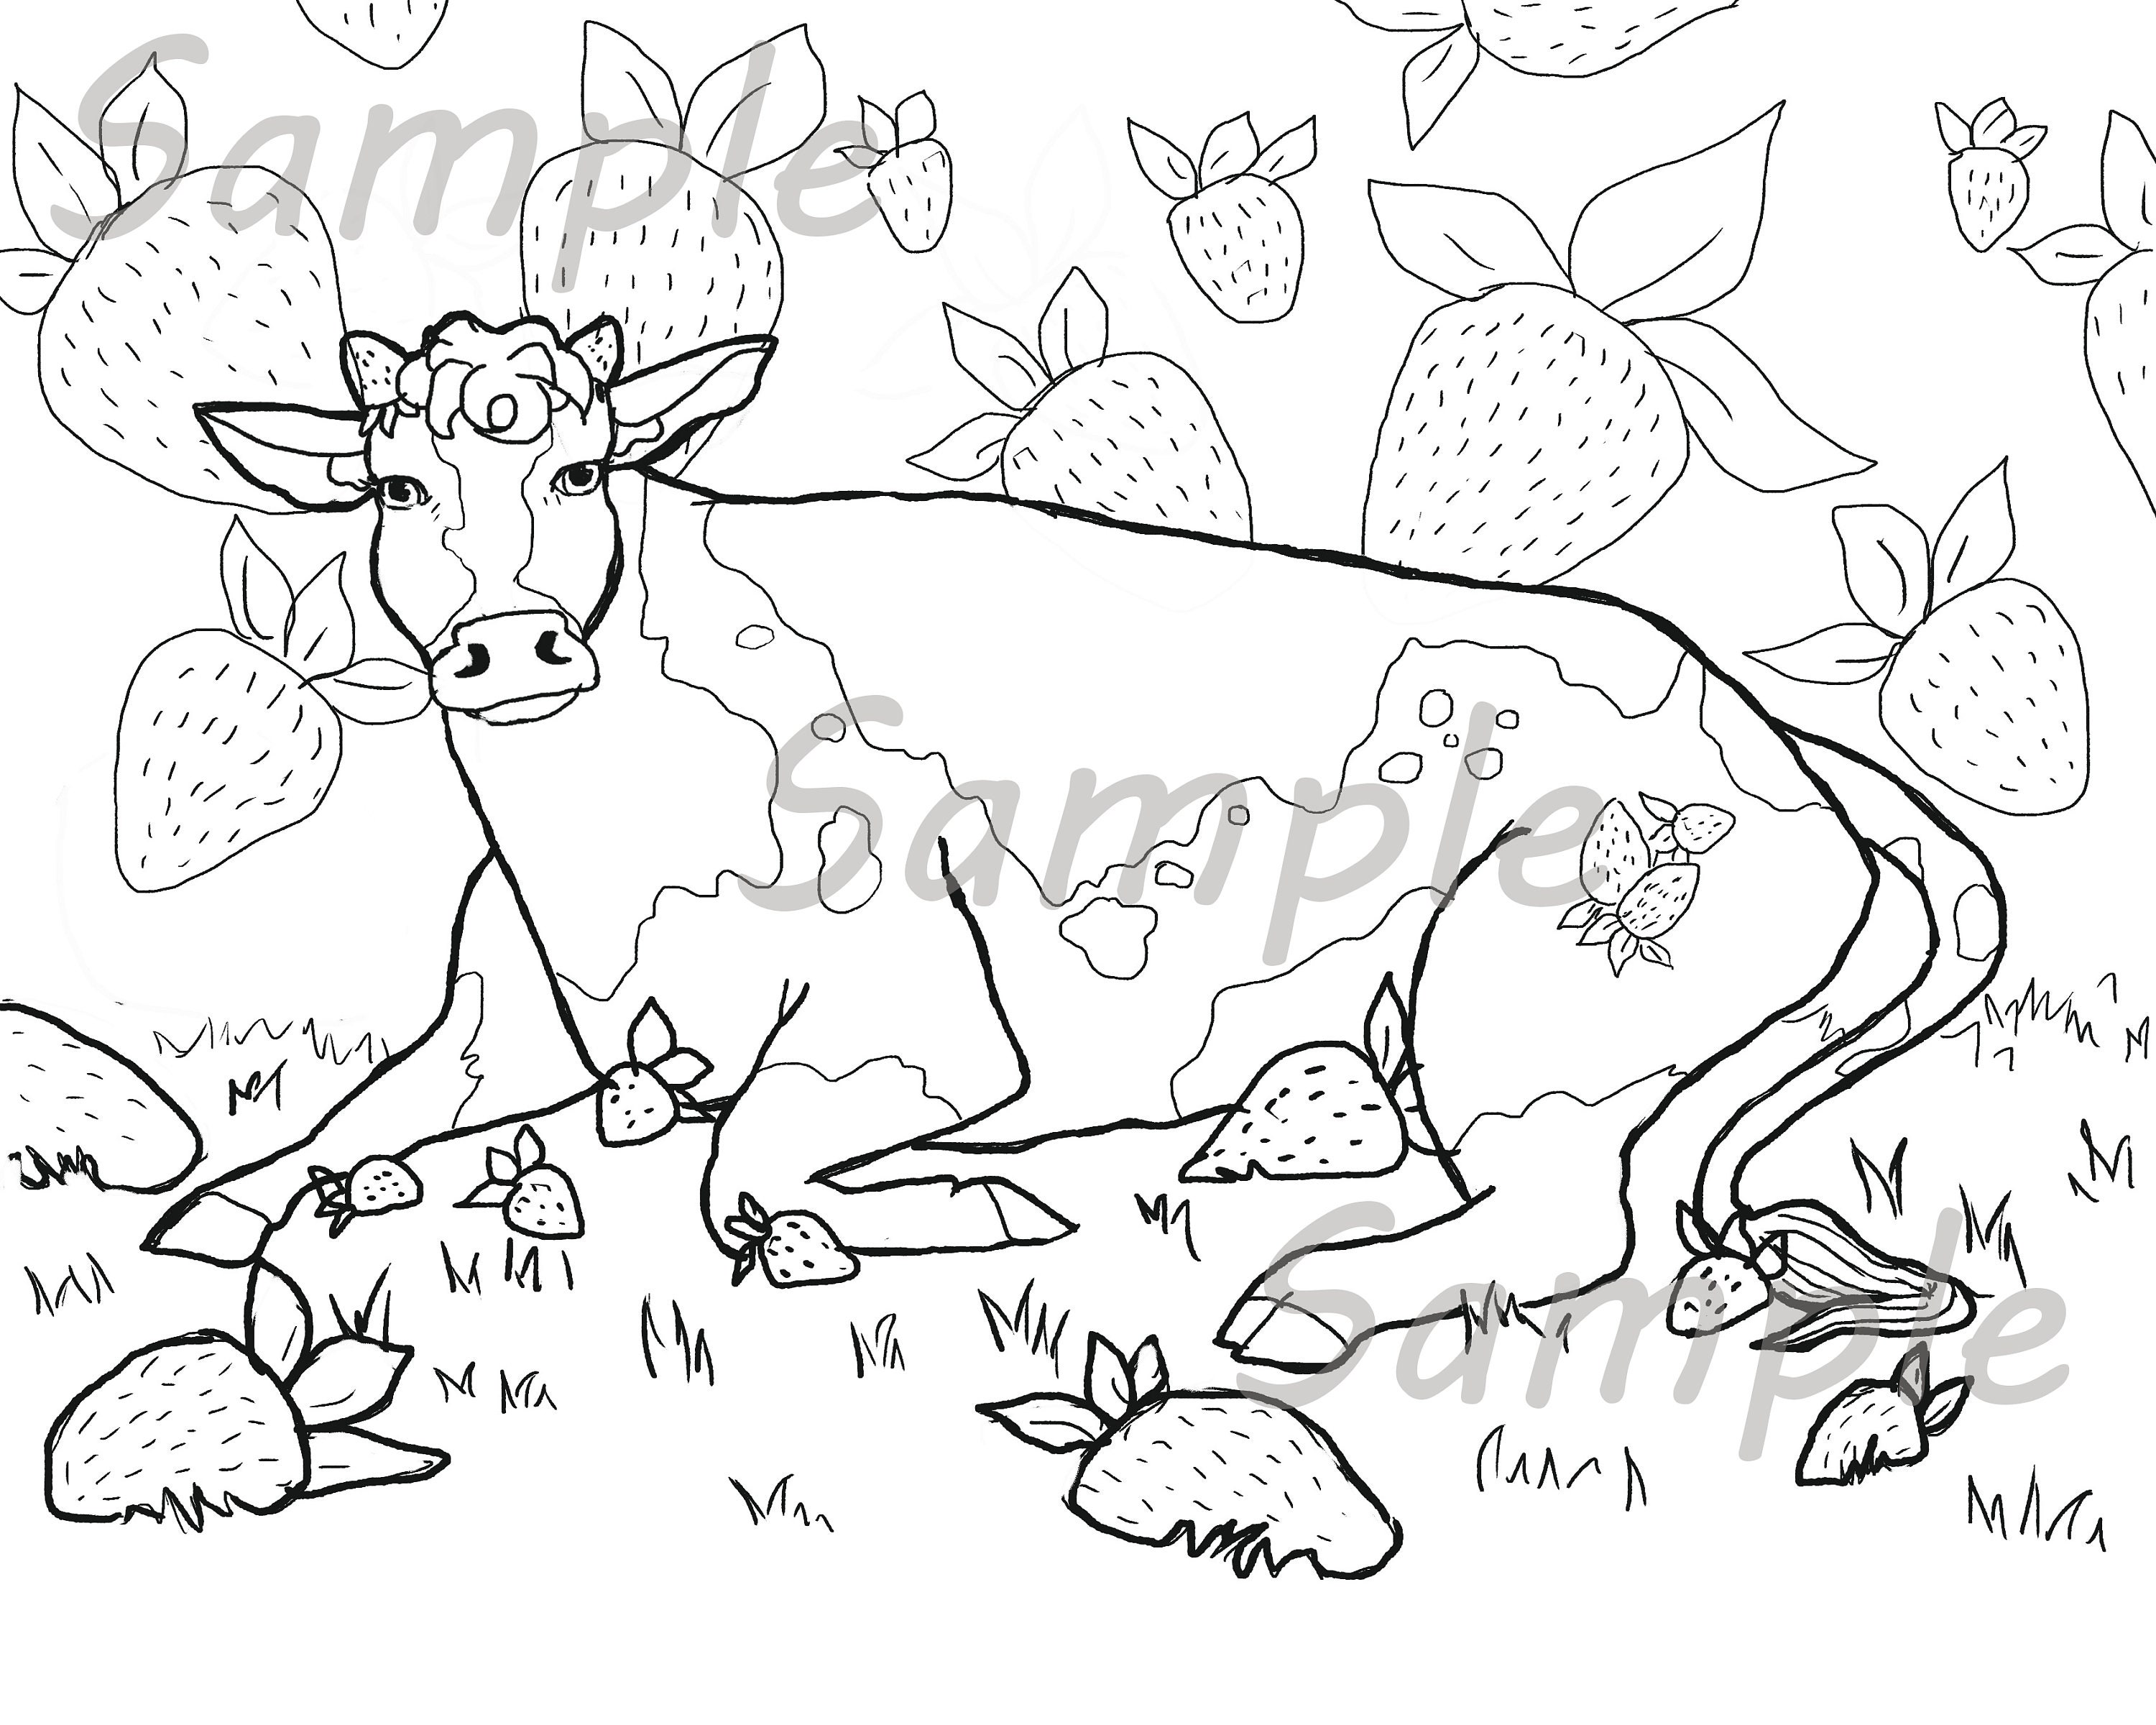 Strawberry cow downloadable coloring page instant download